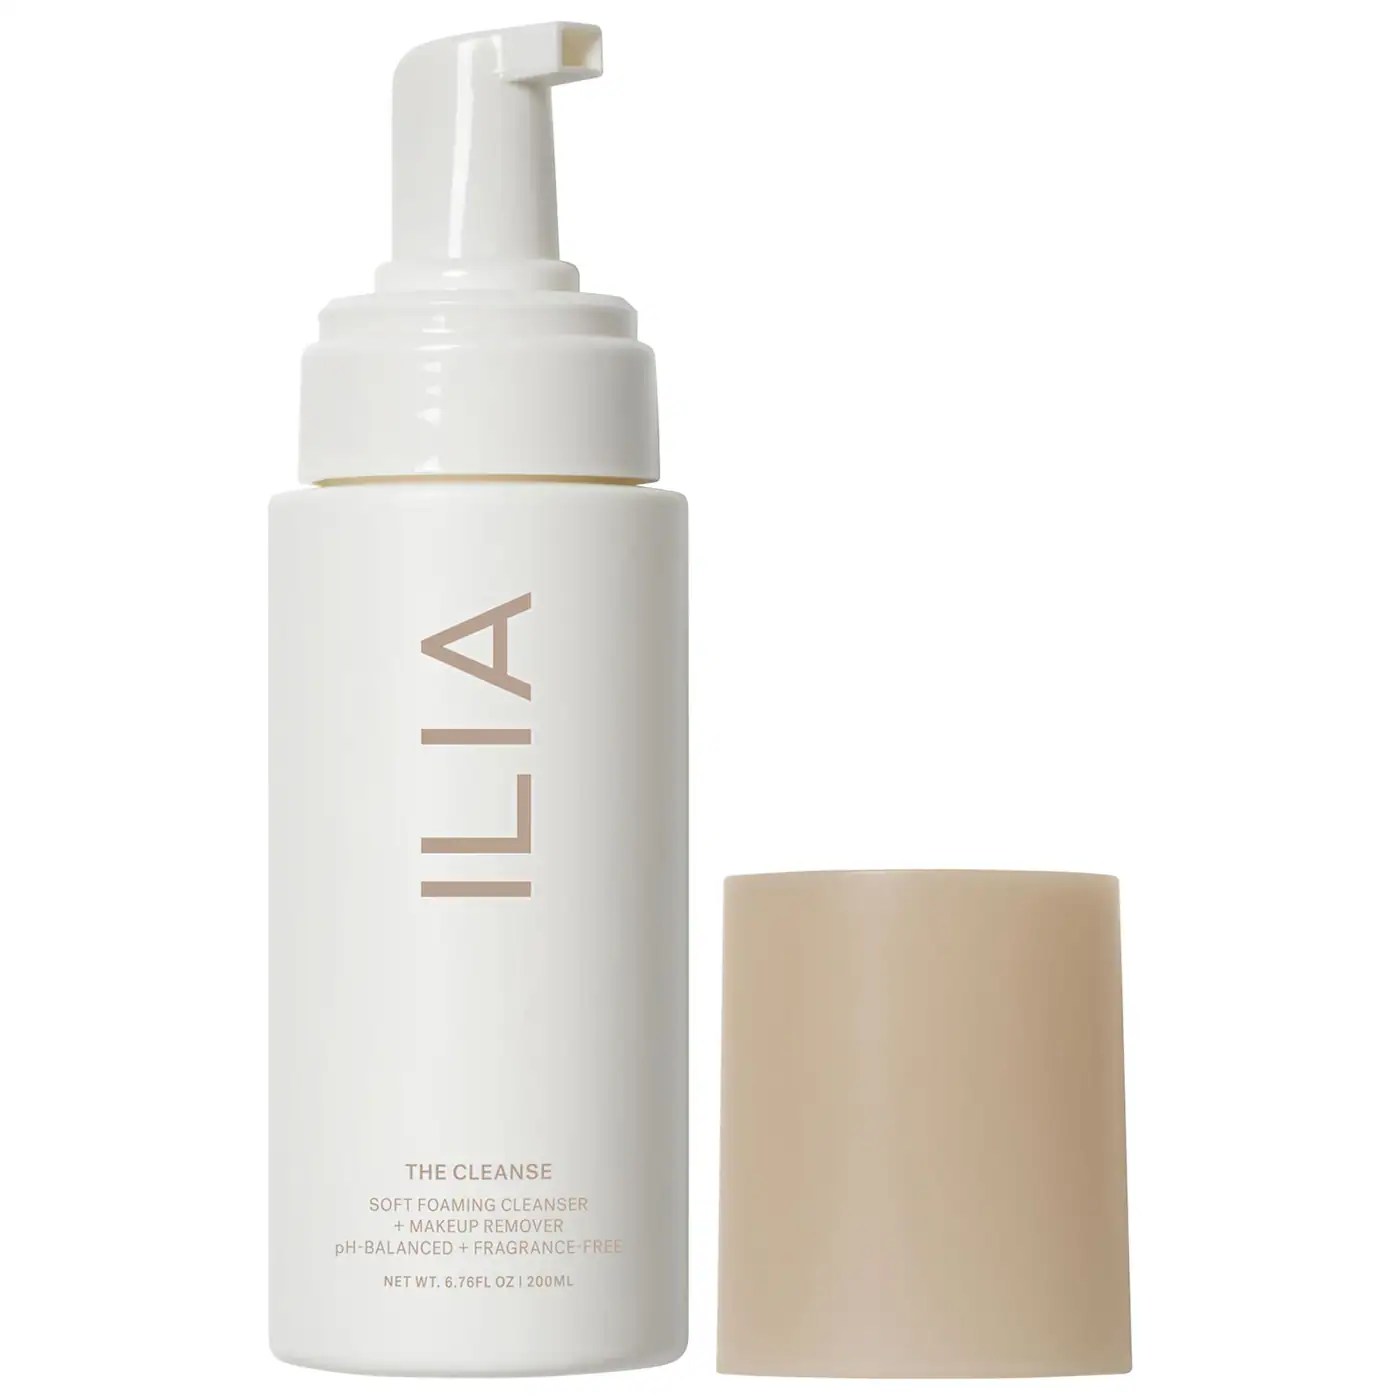 ilia the cleanse, one of the best oil-free makeup removers